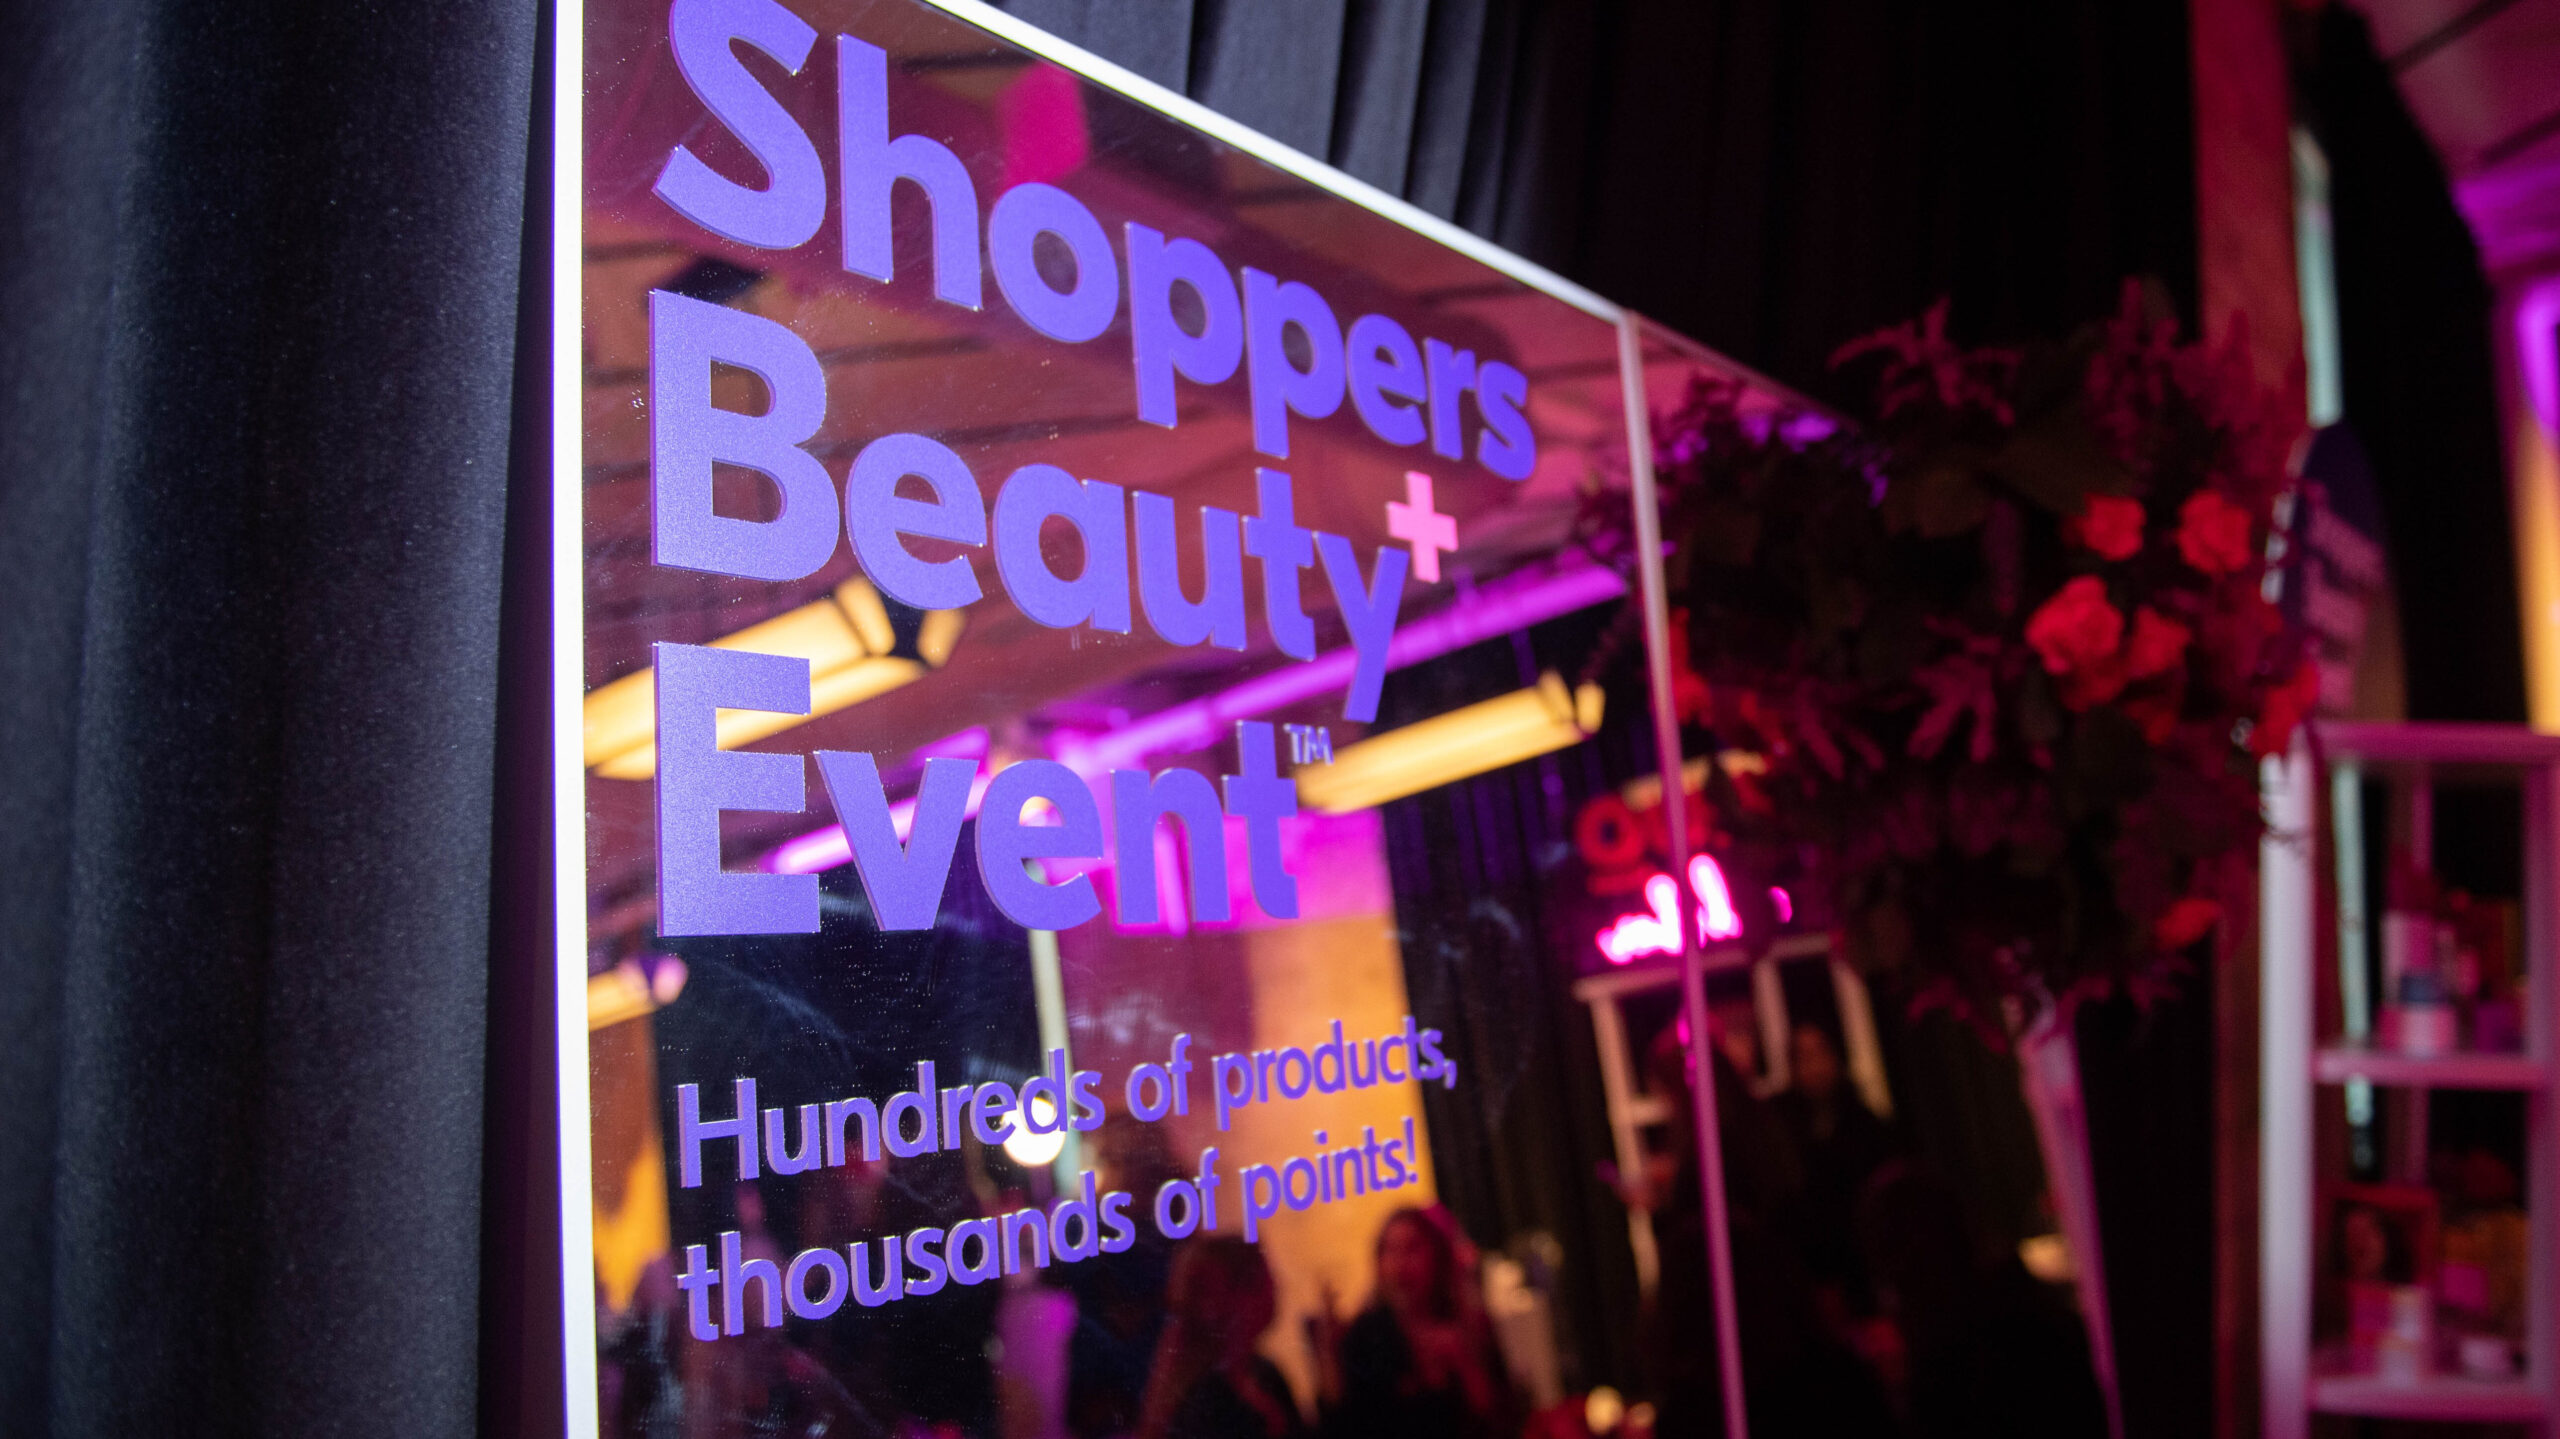 Shoppers Beauty Event 2023